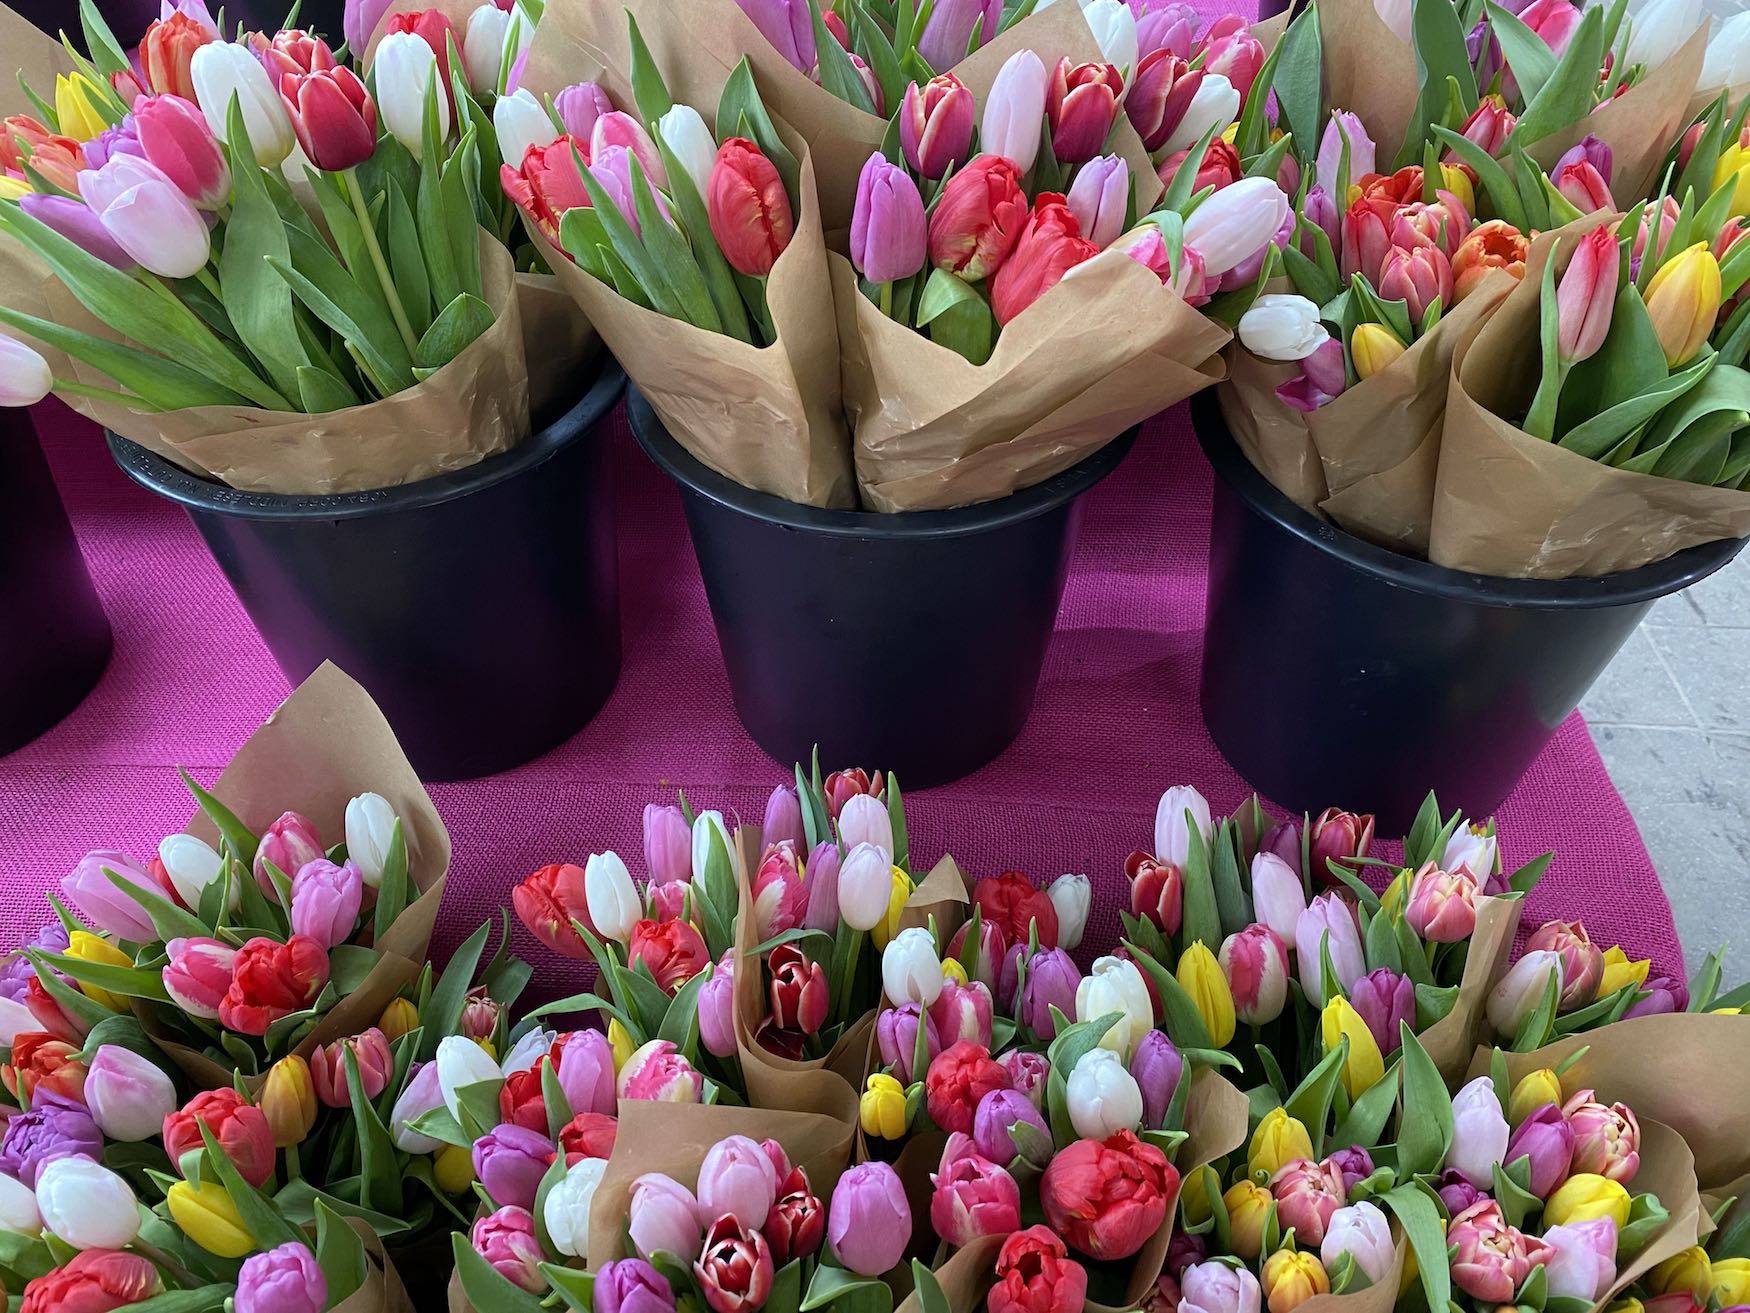 It's the weekend! Number 248, Tulips for Sale at a Local Farm Stand